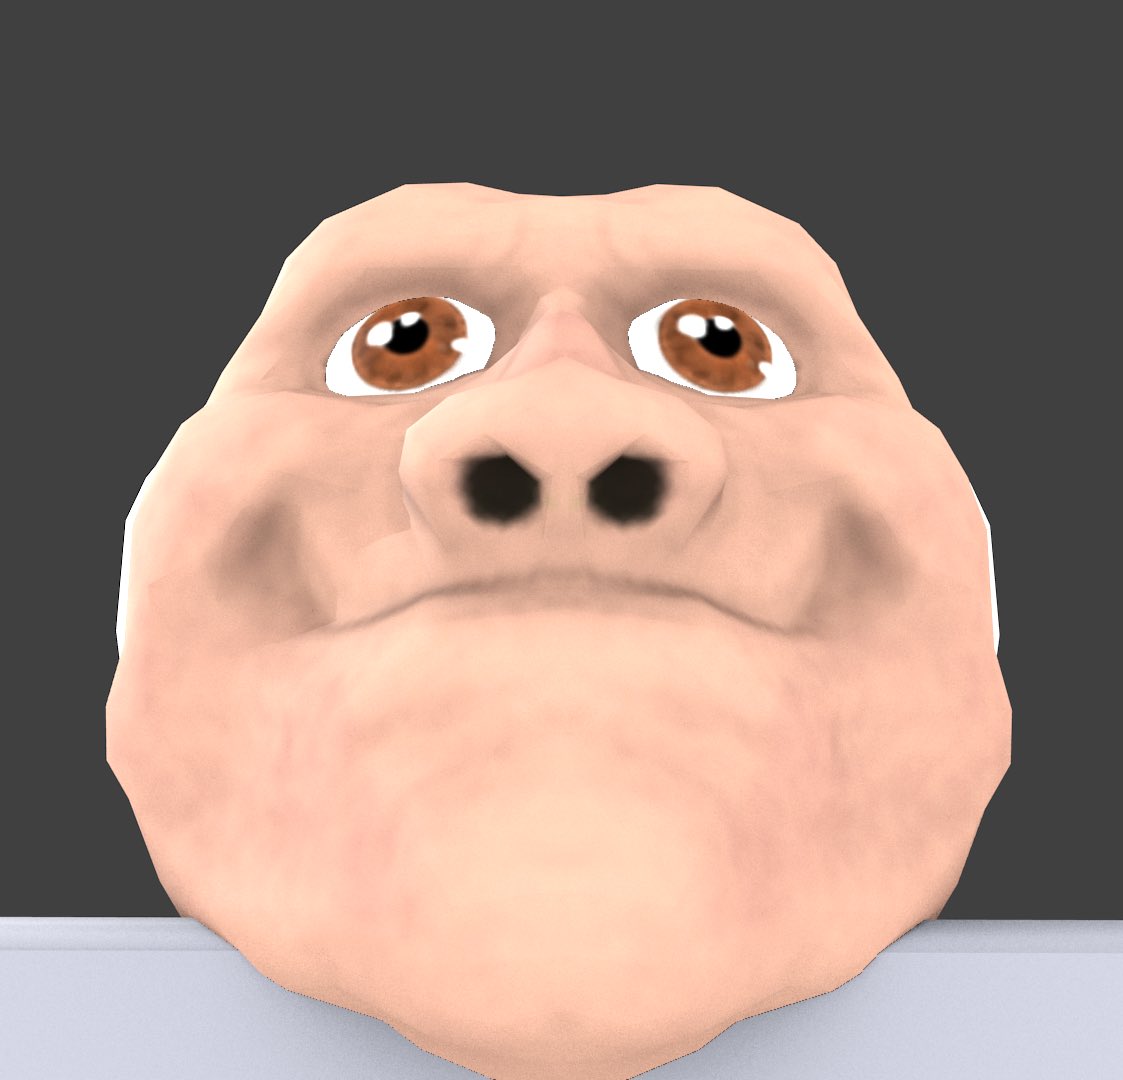 Reverse Polarity On Twitter I Just Want To Know How You Knew What I Looked Like To Be Able To Recreate Me O - roblox old man